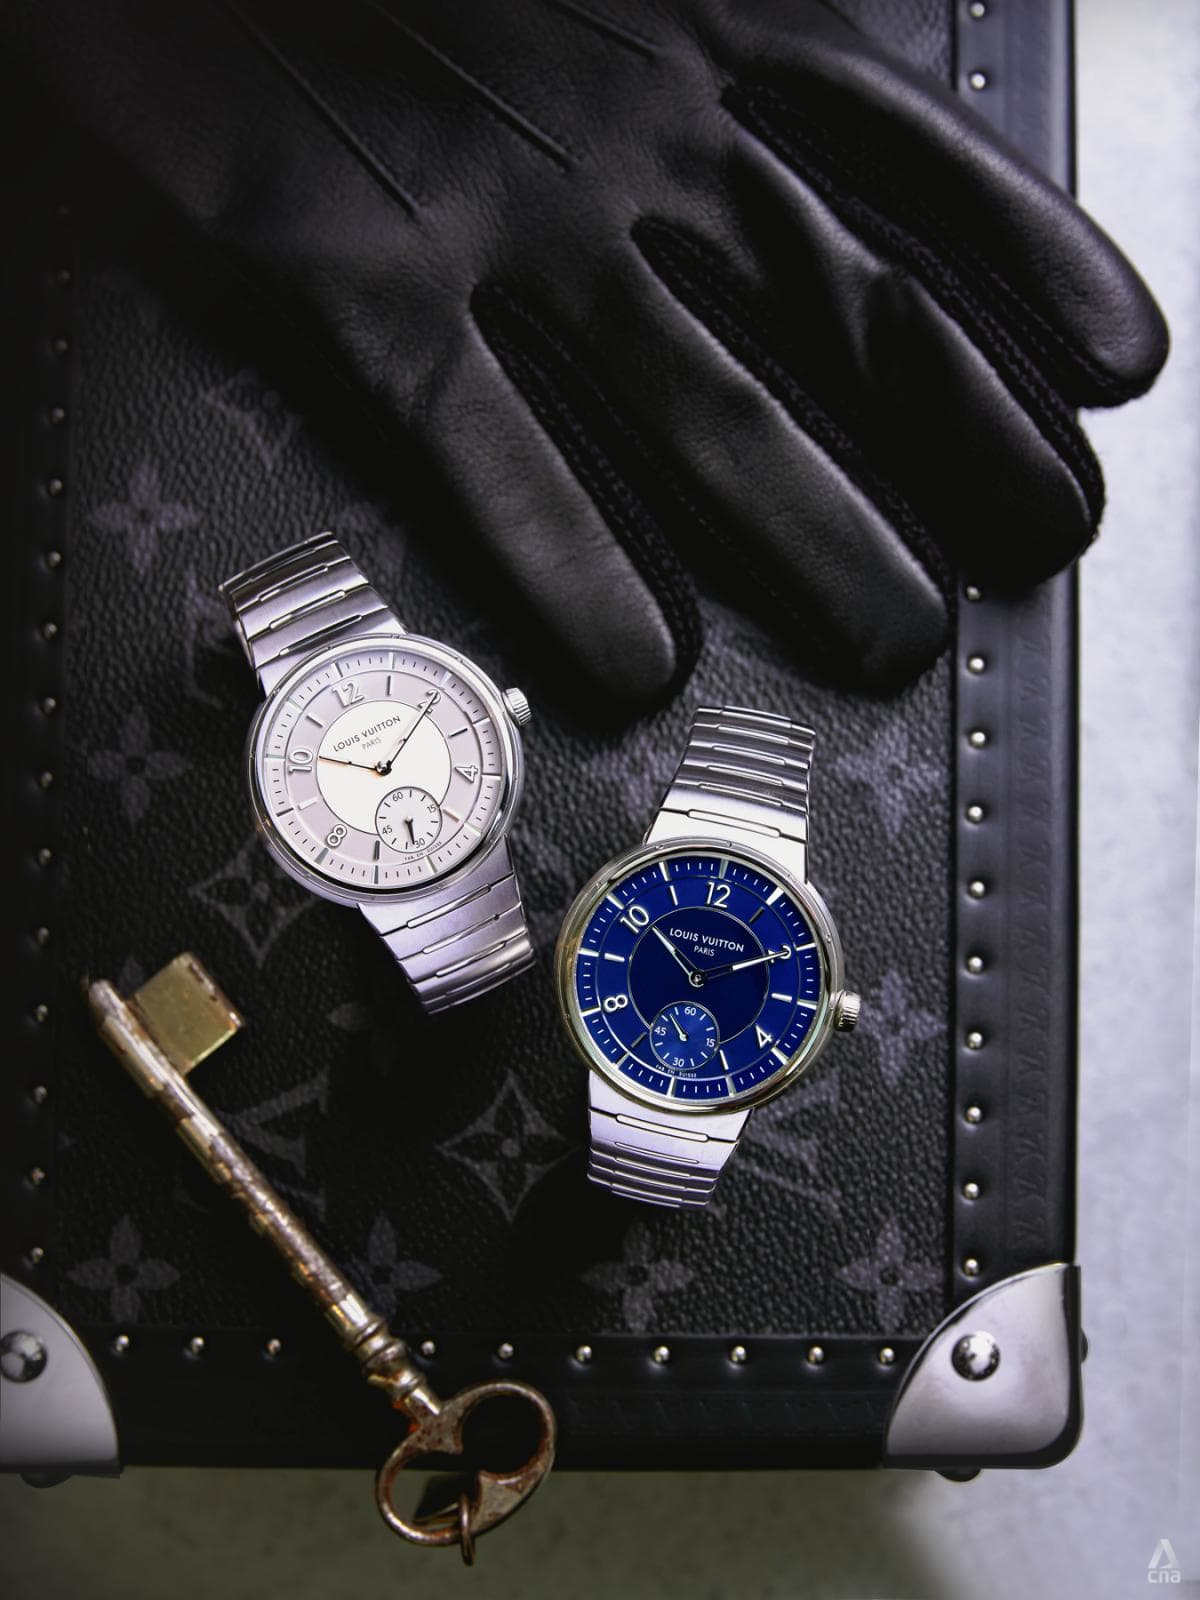 Louis Vuitton, Jean Arnault, and Big Watchmaking Ambitions